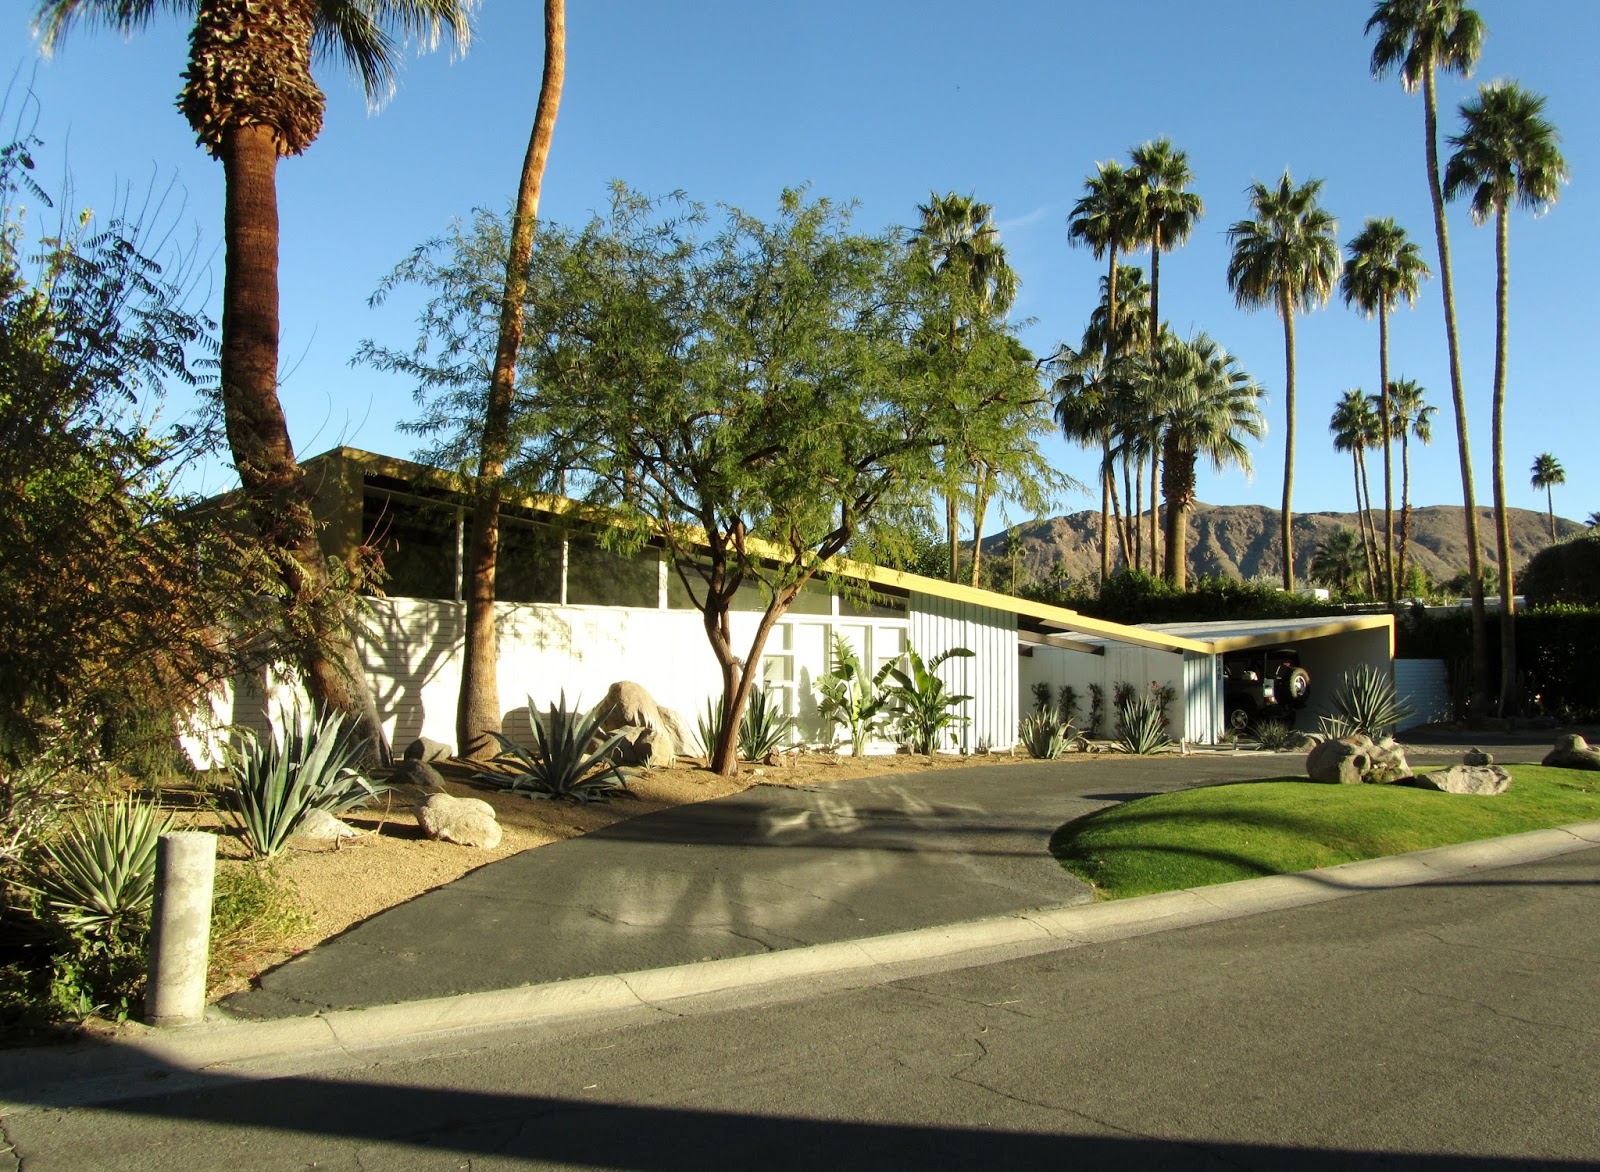 A mid-century modern house with a flat roof and clean lines surrounded by palm trees and desert landscaping under a clear blue sky with mountains in the background.